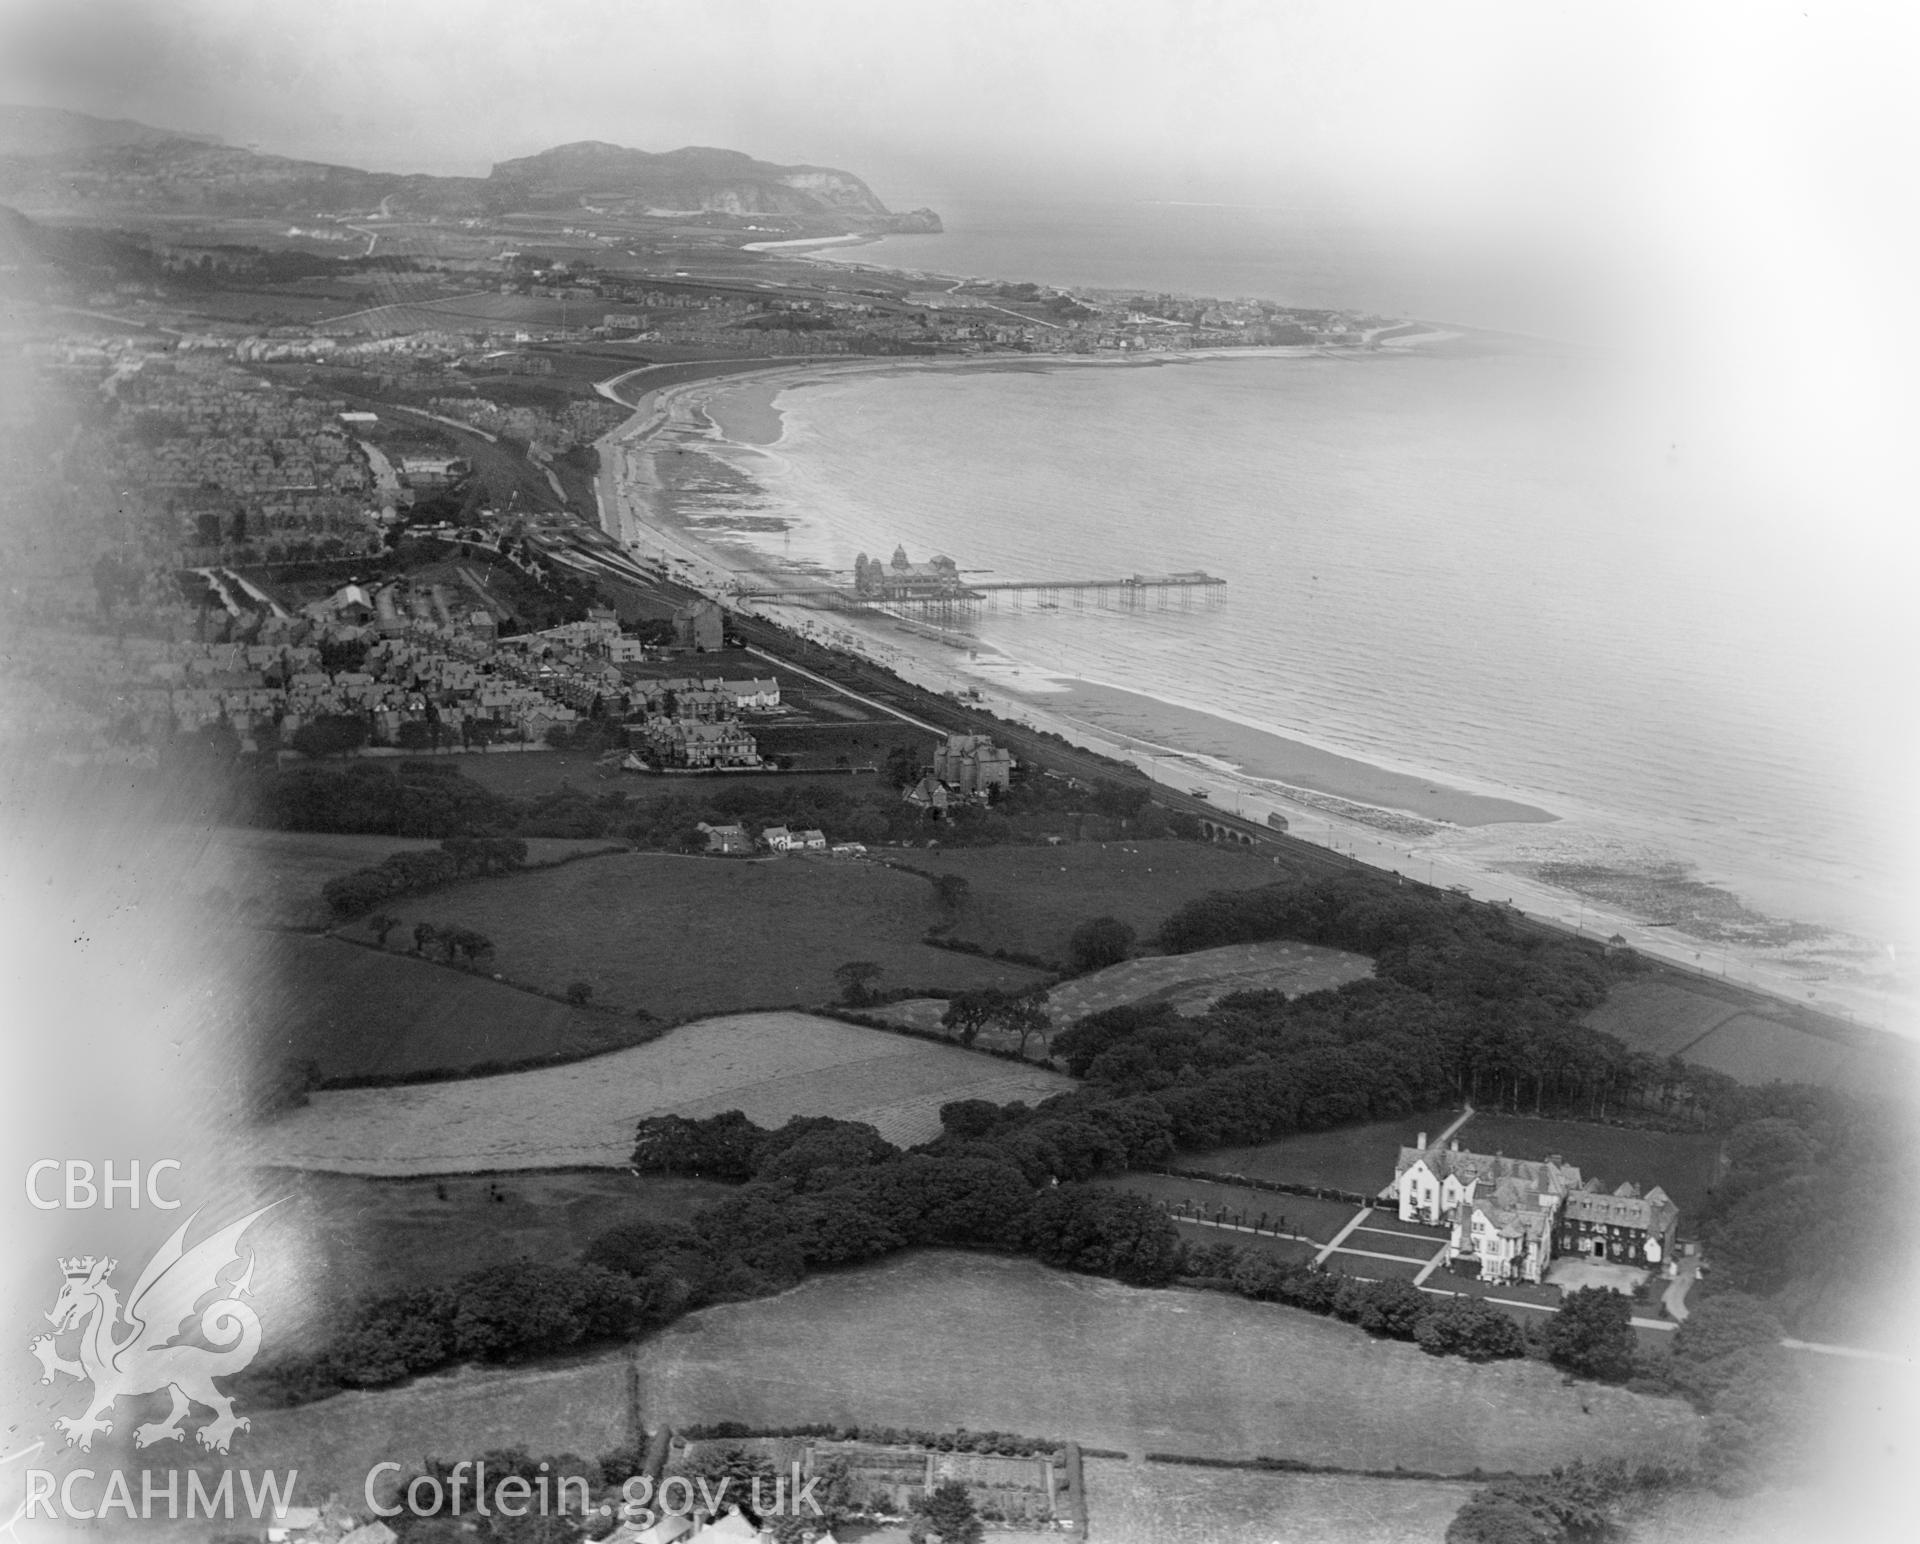 General view of Colwyn Bay showing pier and Glan-y-Don, oblique aerial view. 5?x4? black and white glass plate negative.